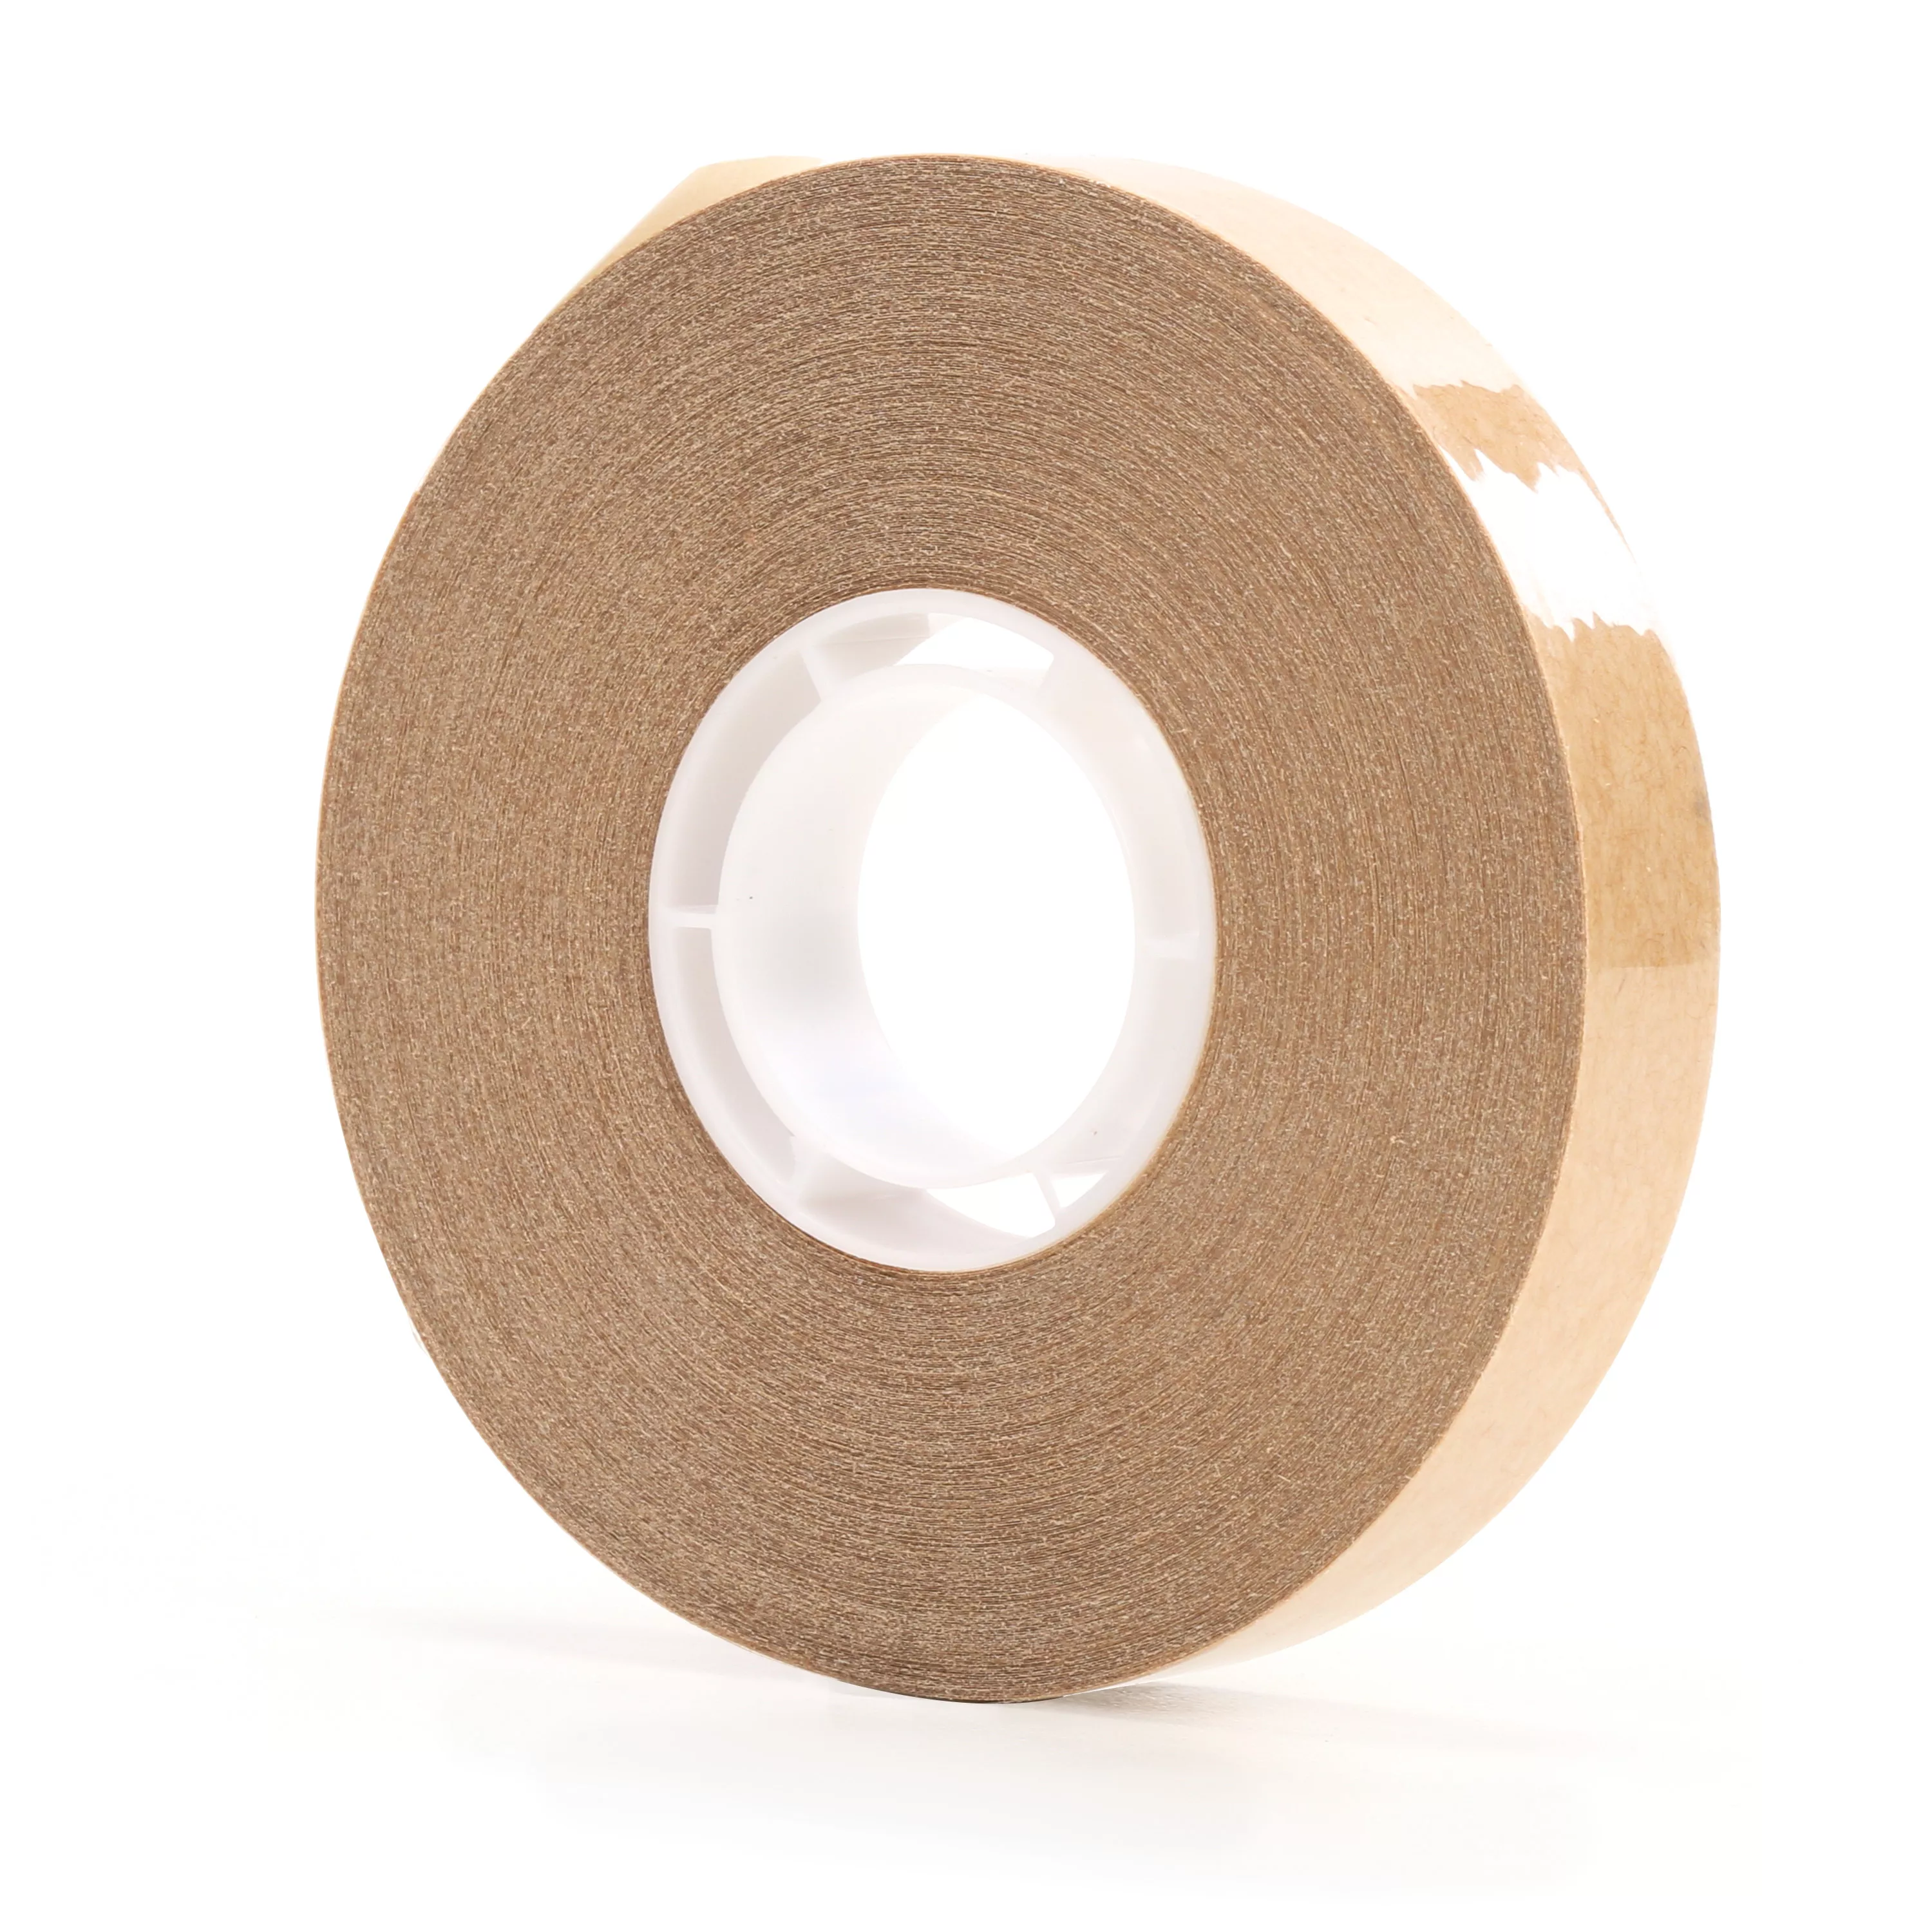 3M™ ATG Adhesive Transfer Tape 987, Clear, 1/2 in x 36 yd, 1.7 mil, (12
Roll/Carton) 72 Roll/Case